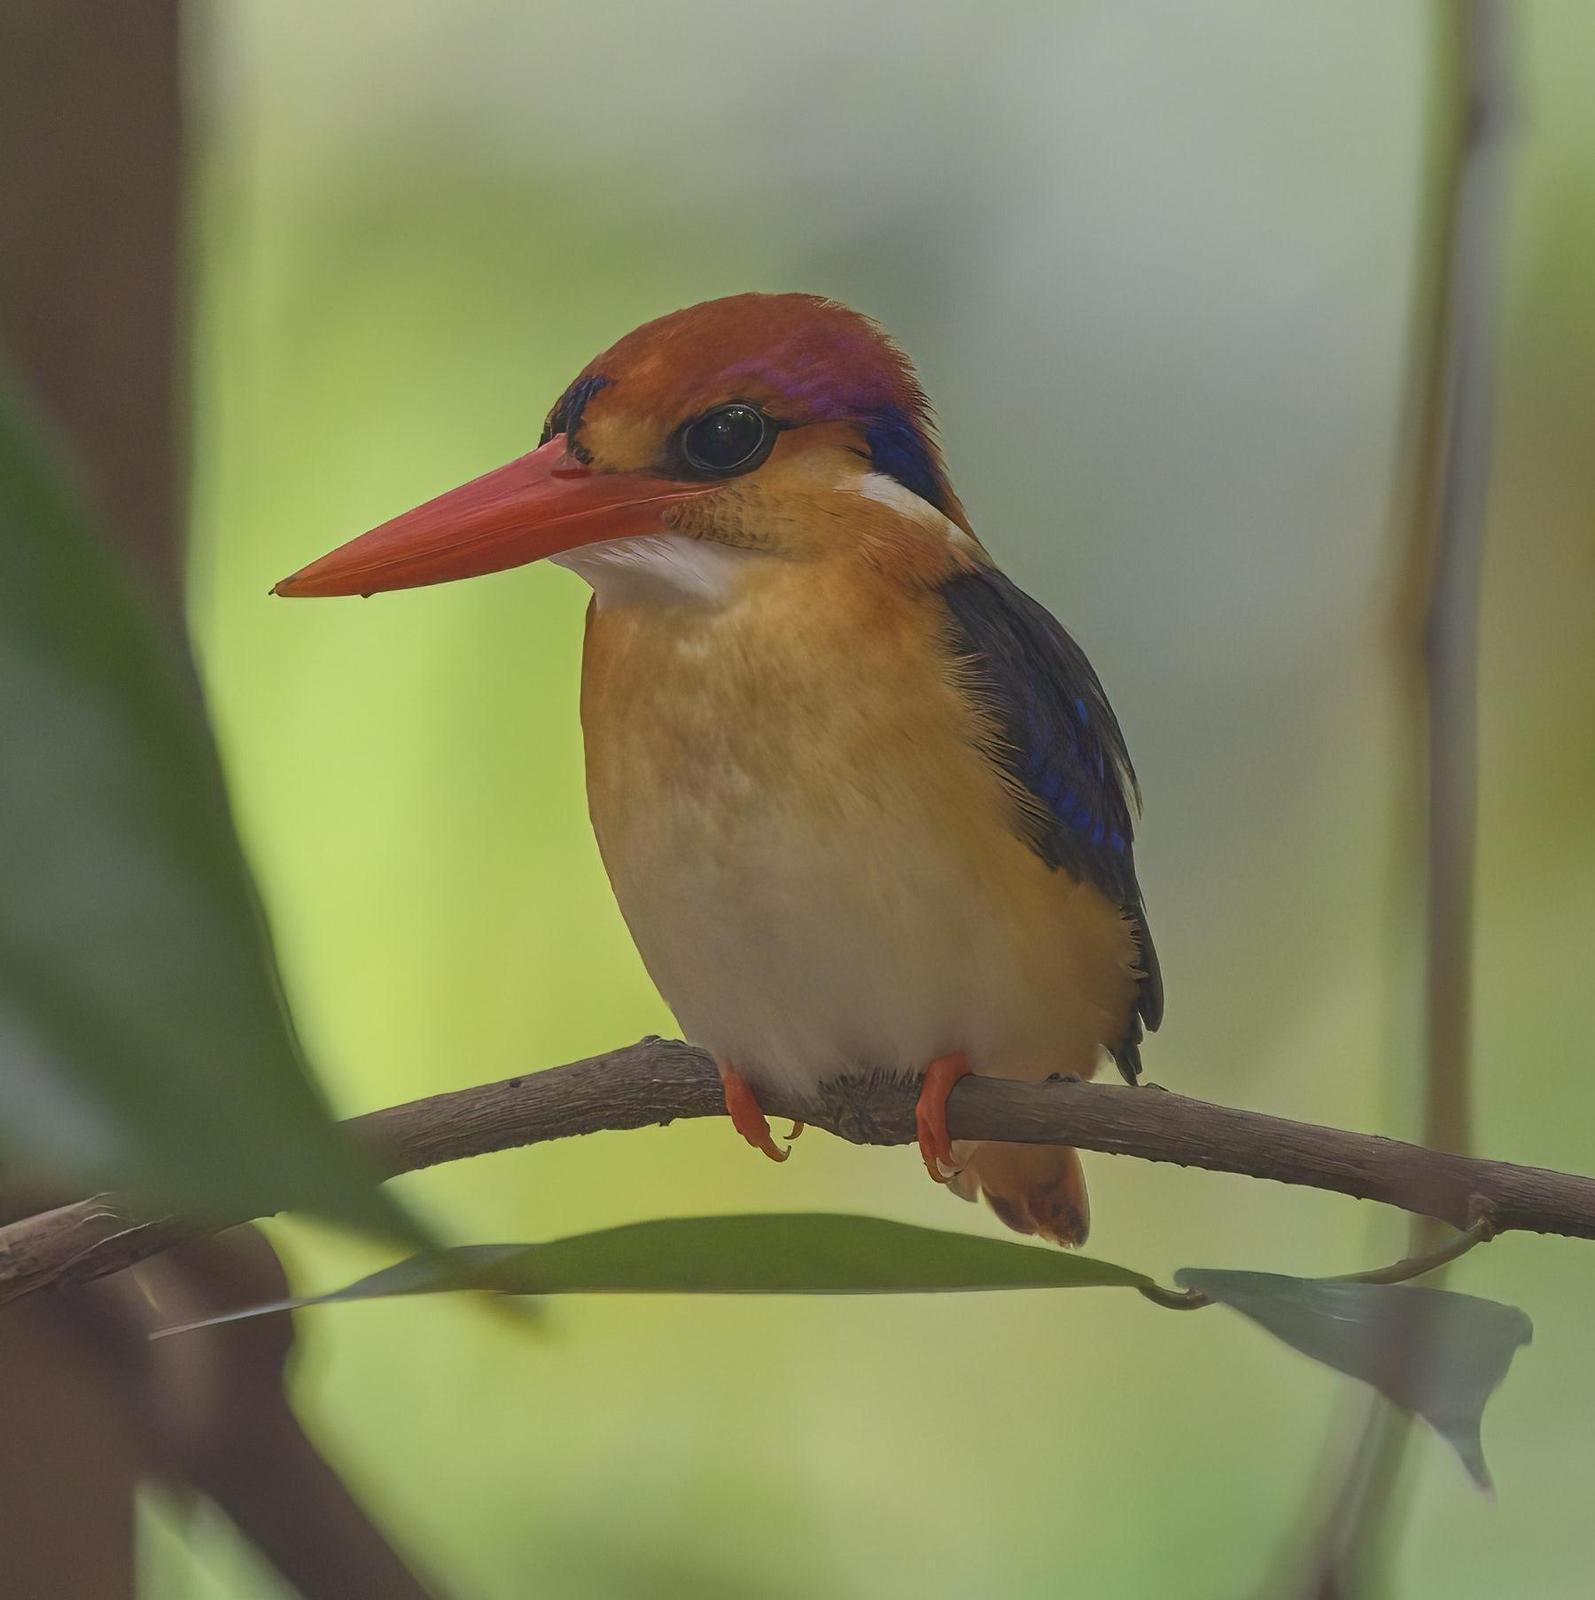 Black-backed Dwarf-Kingfisher Photo by Steven Cheong